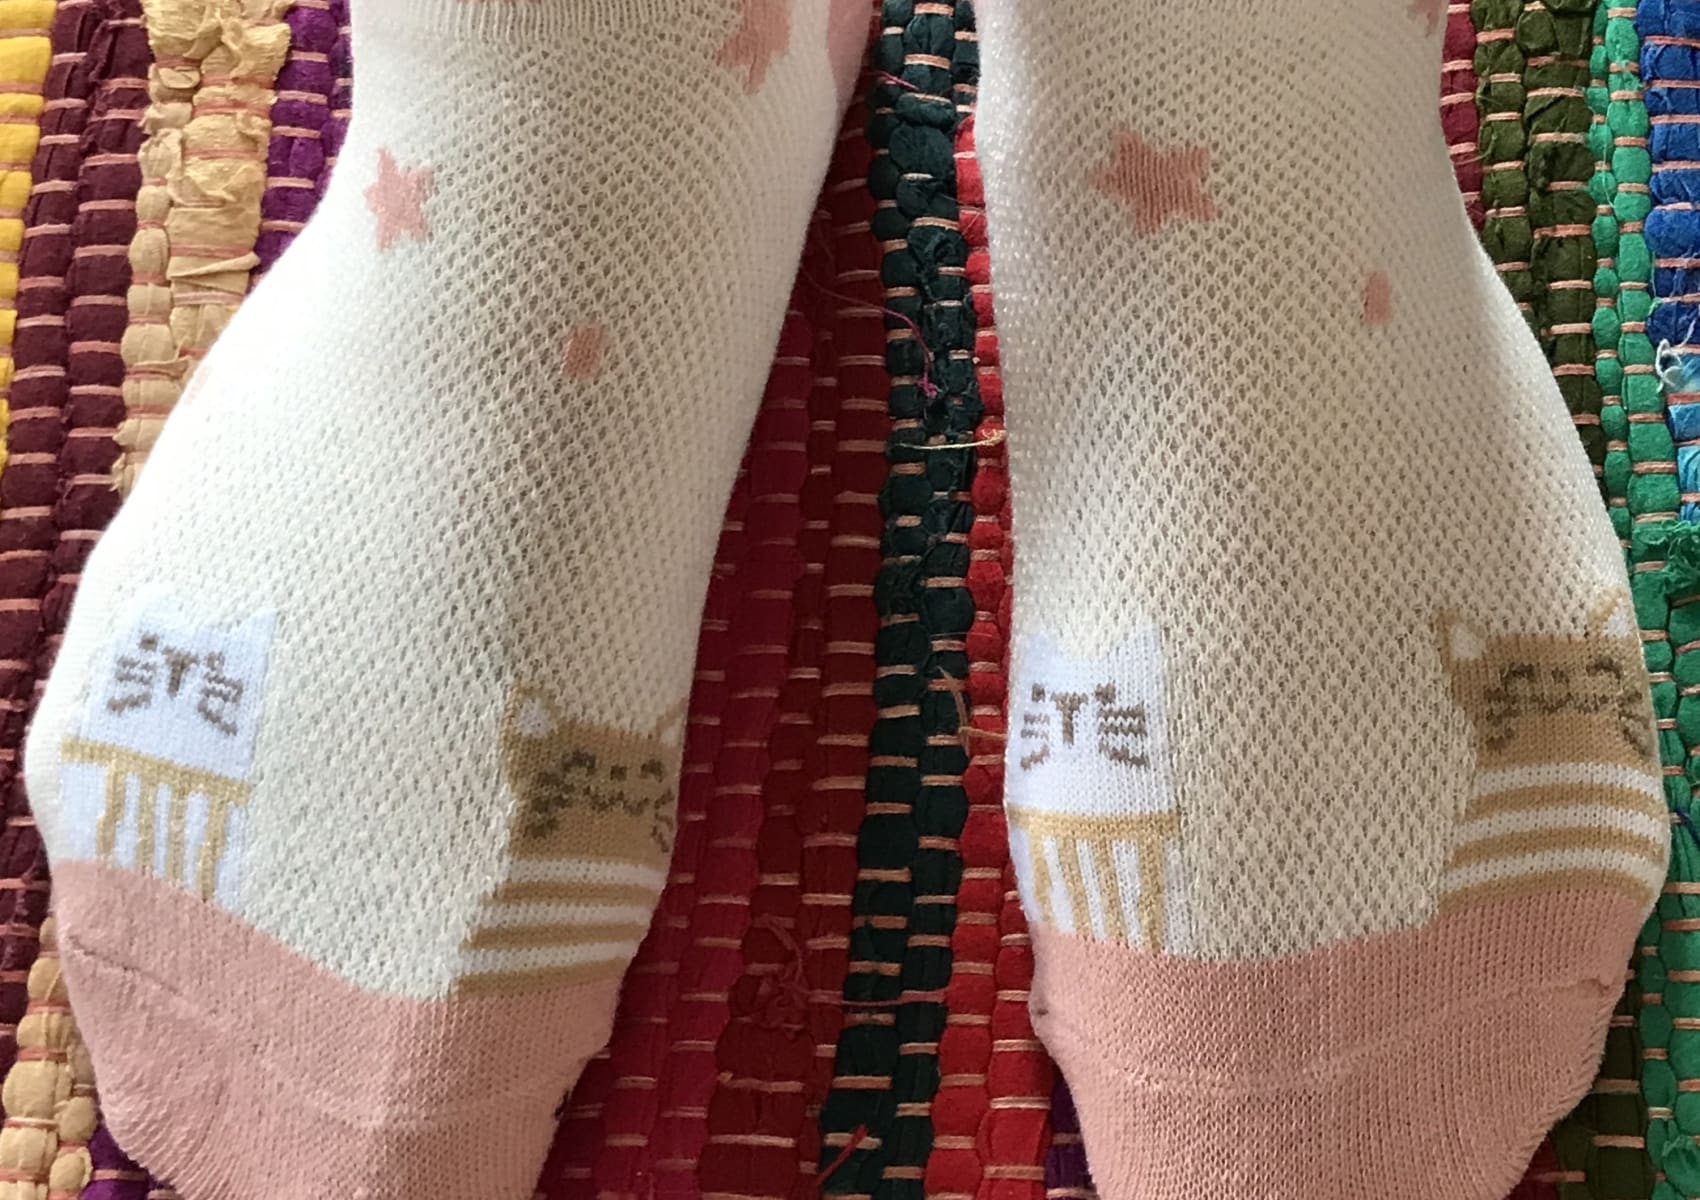 Pale pink and white shortie  socks with cute cat face and star